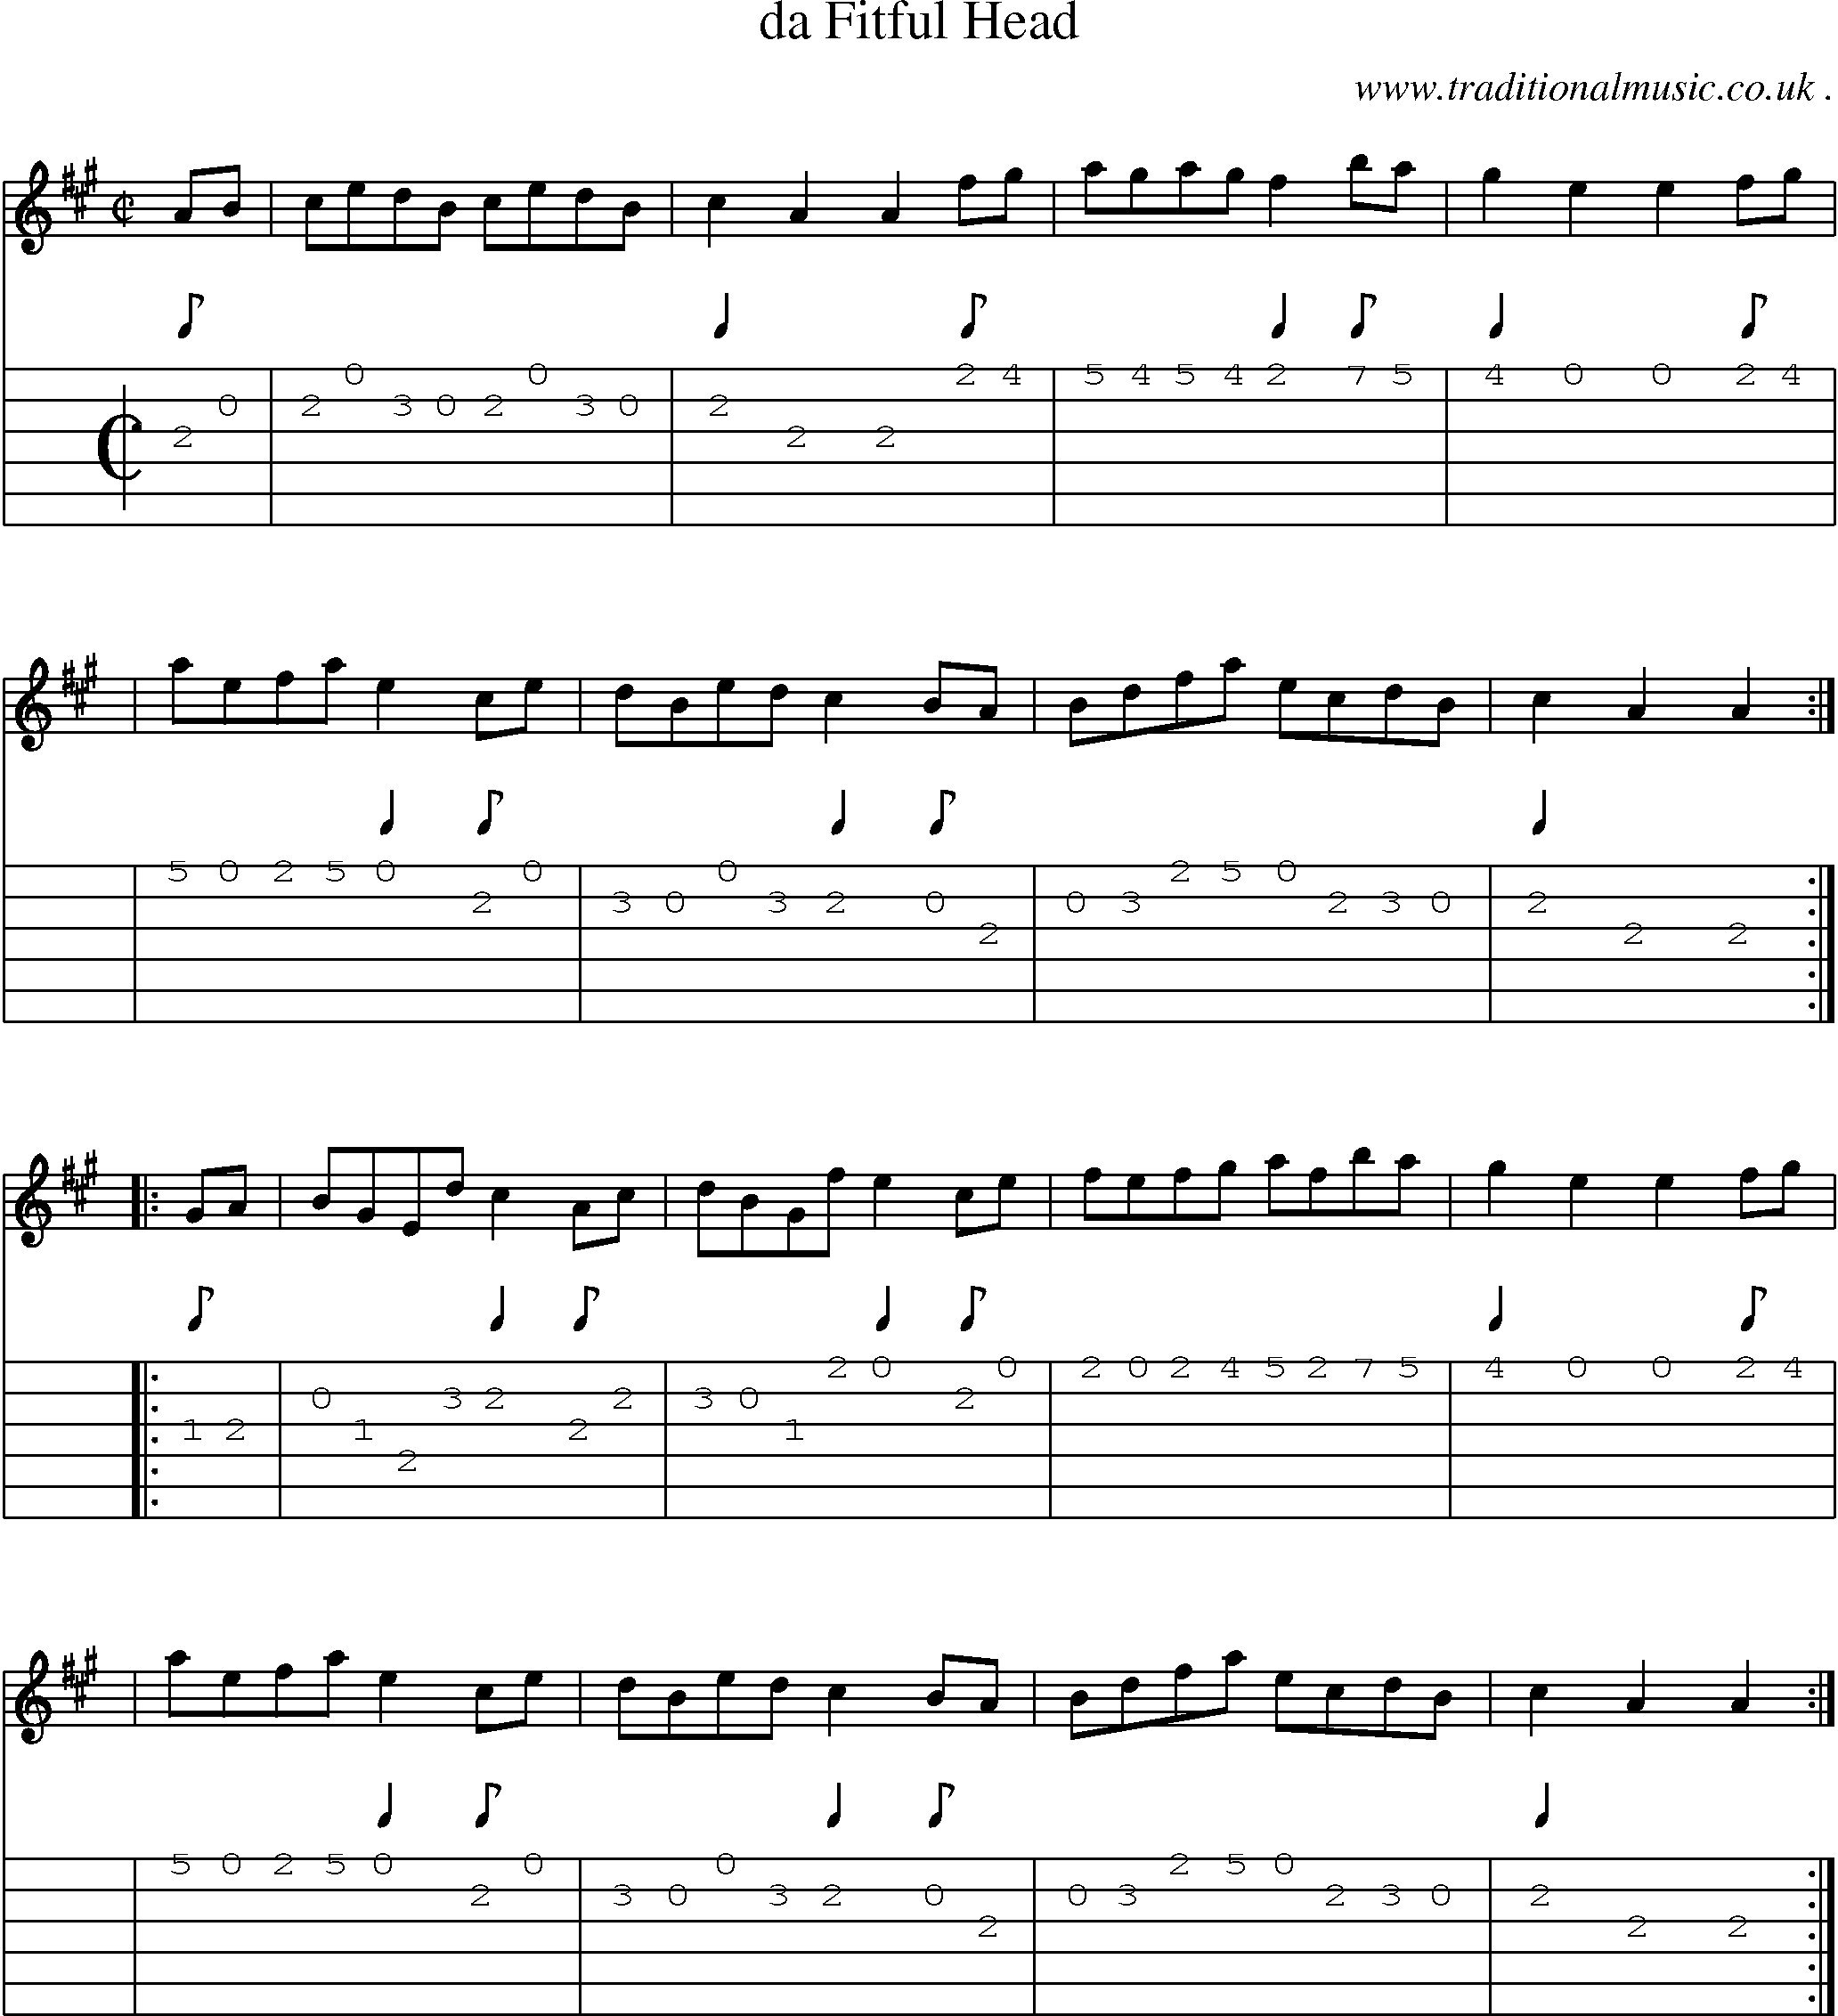 Sheet-music  score, Chords and Guitar Tabs for Da Fitful Head